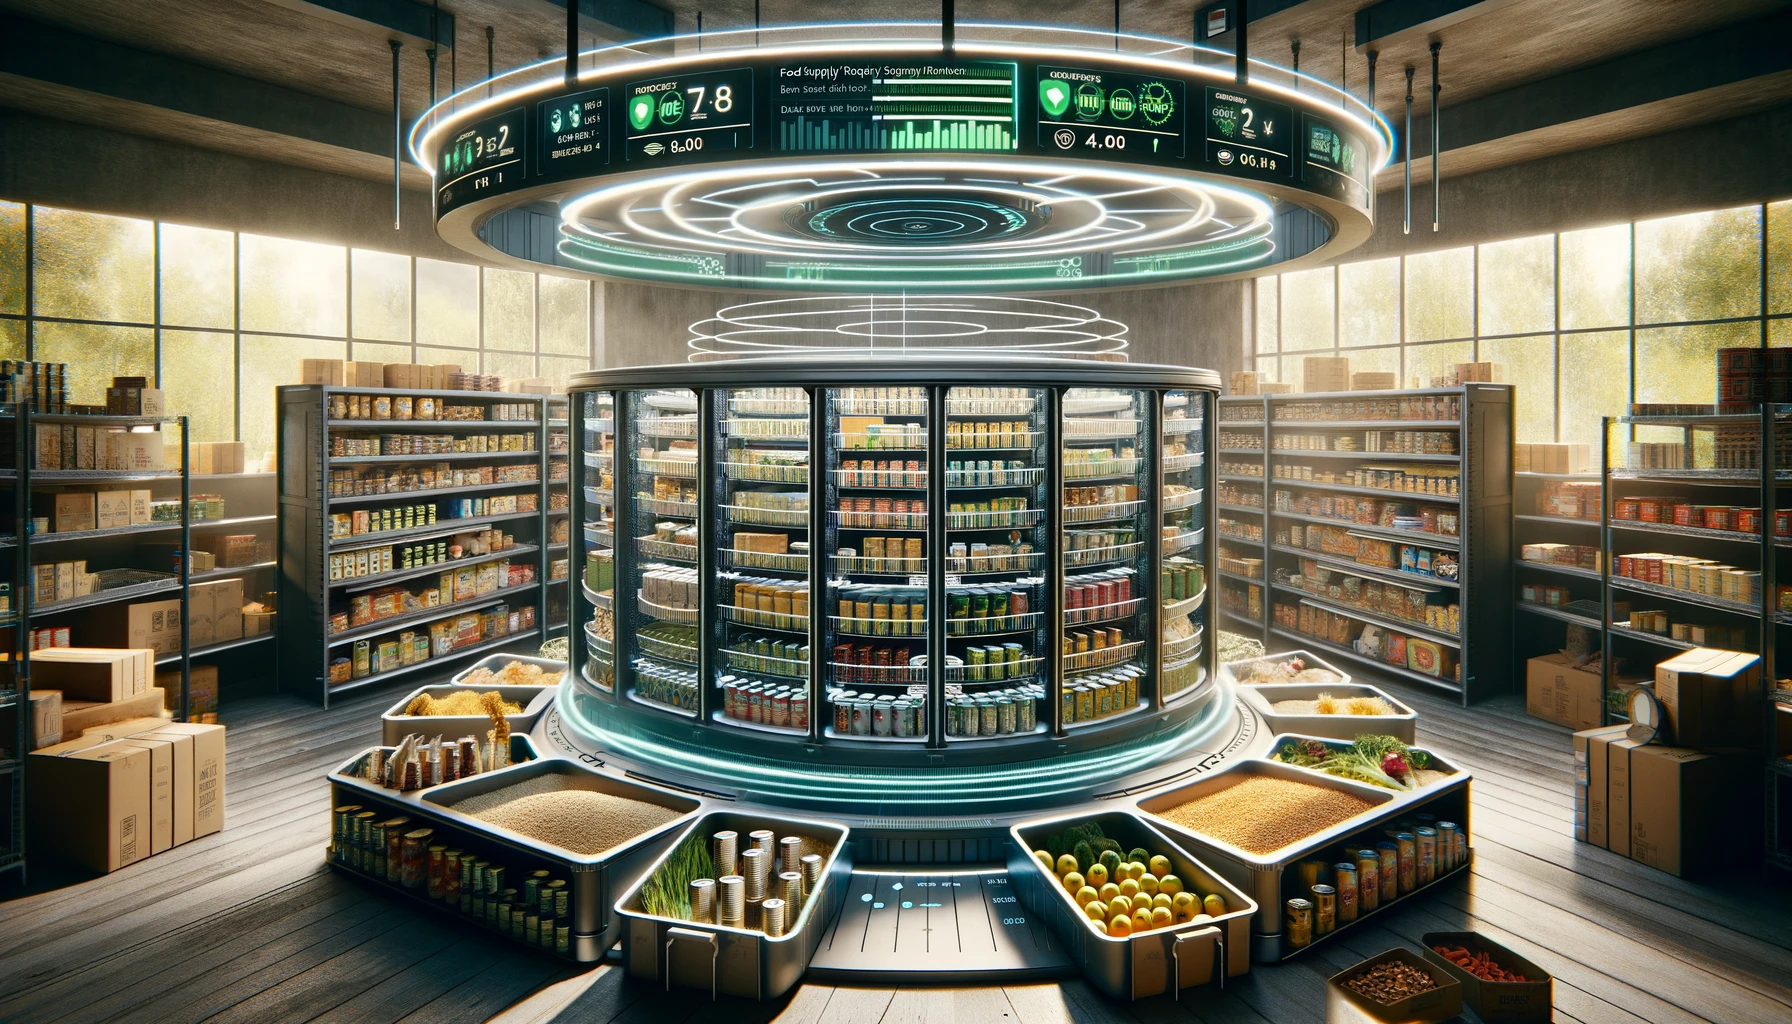 Spacious, modern pantry with an automated food rotation system implementing FIFO, showcasing neatly organized and labeled canned goods, bulk grains, and freeze-dried foods, complemented by digital displays for purchase and expiration dates, highlighting high-tech efficiency and preparedness for sustainable food supply management